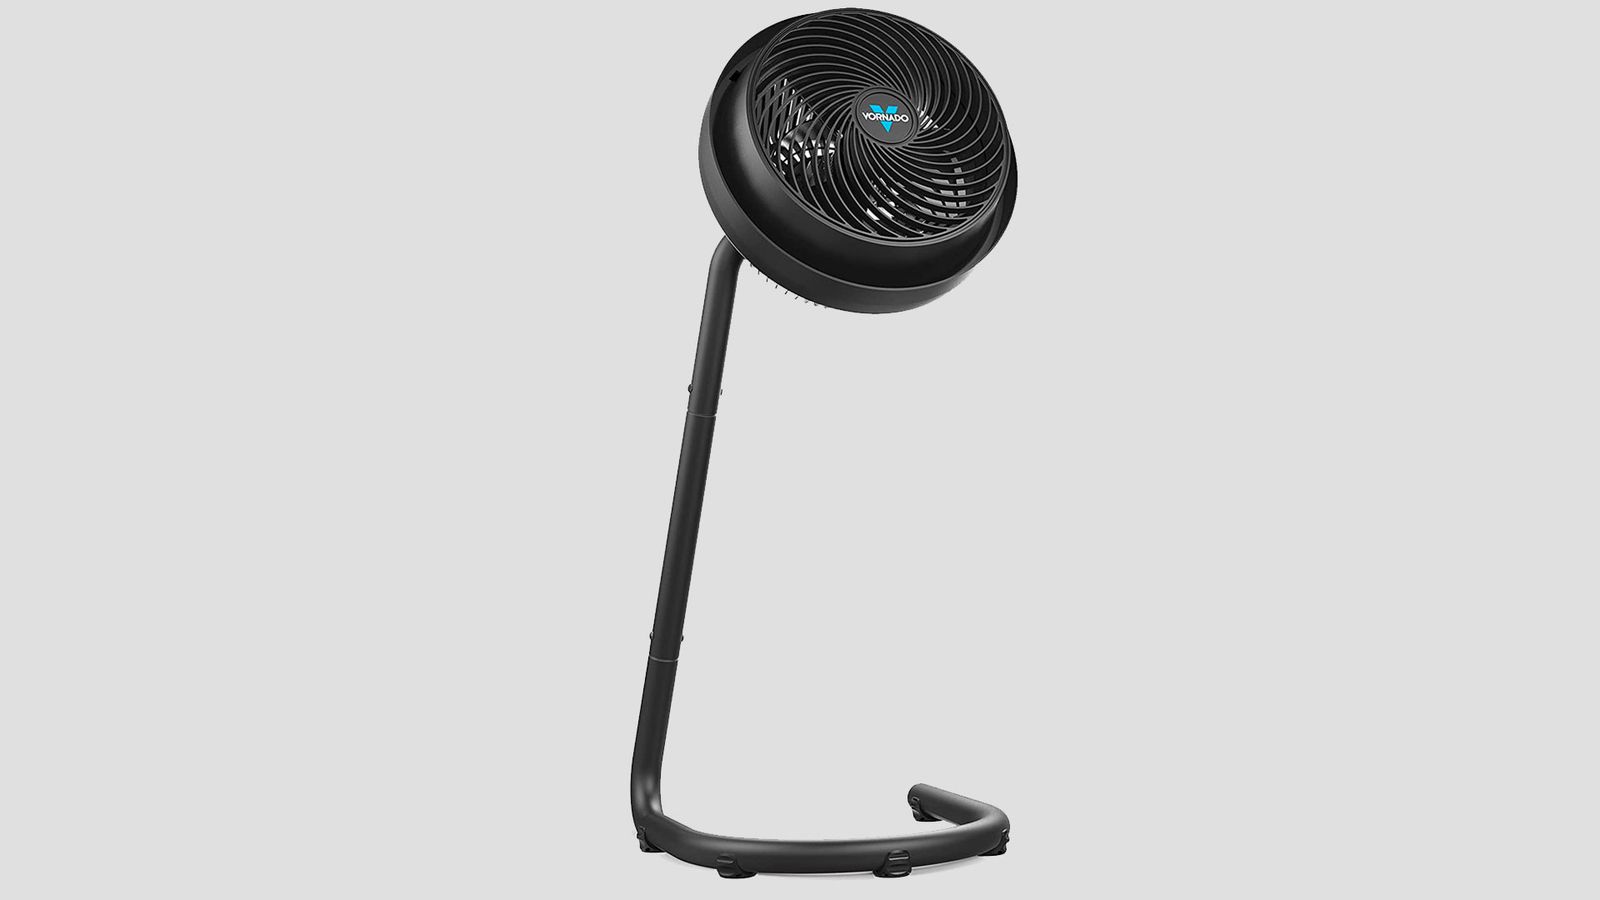 Vornado 783 product image of a black fan on a stand with a blue centre piece.